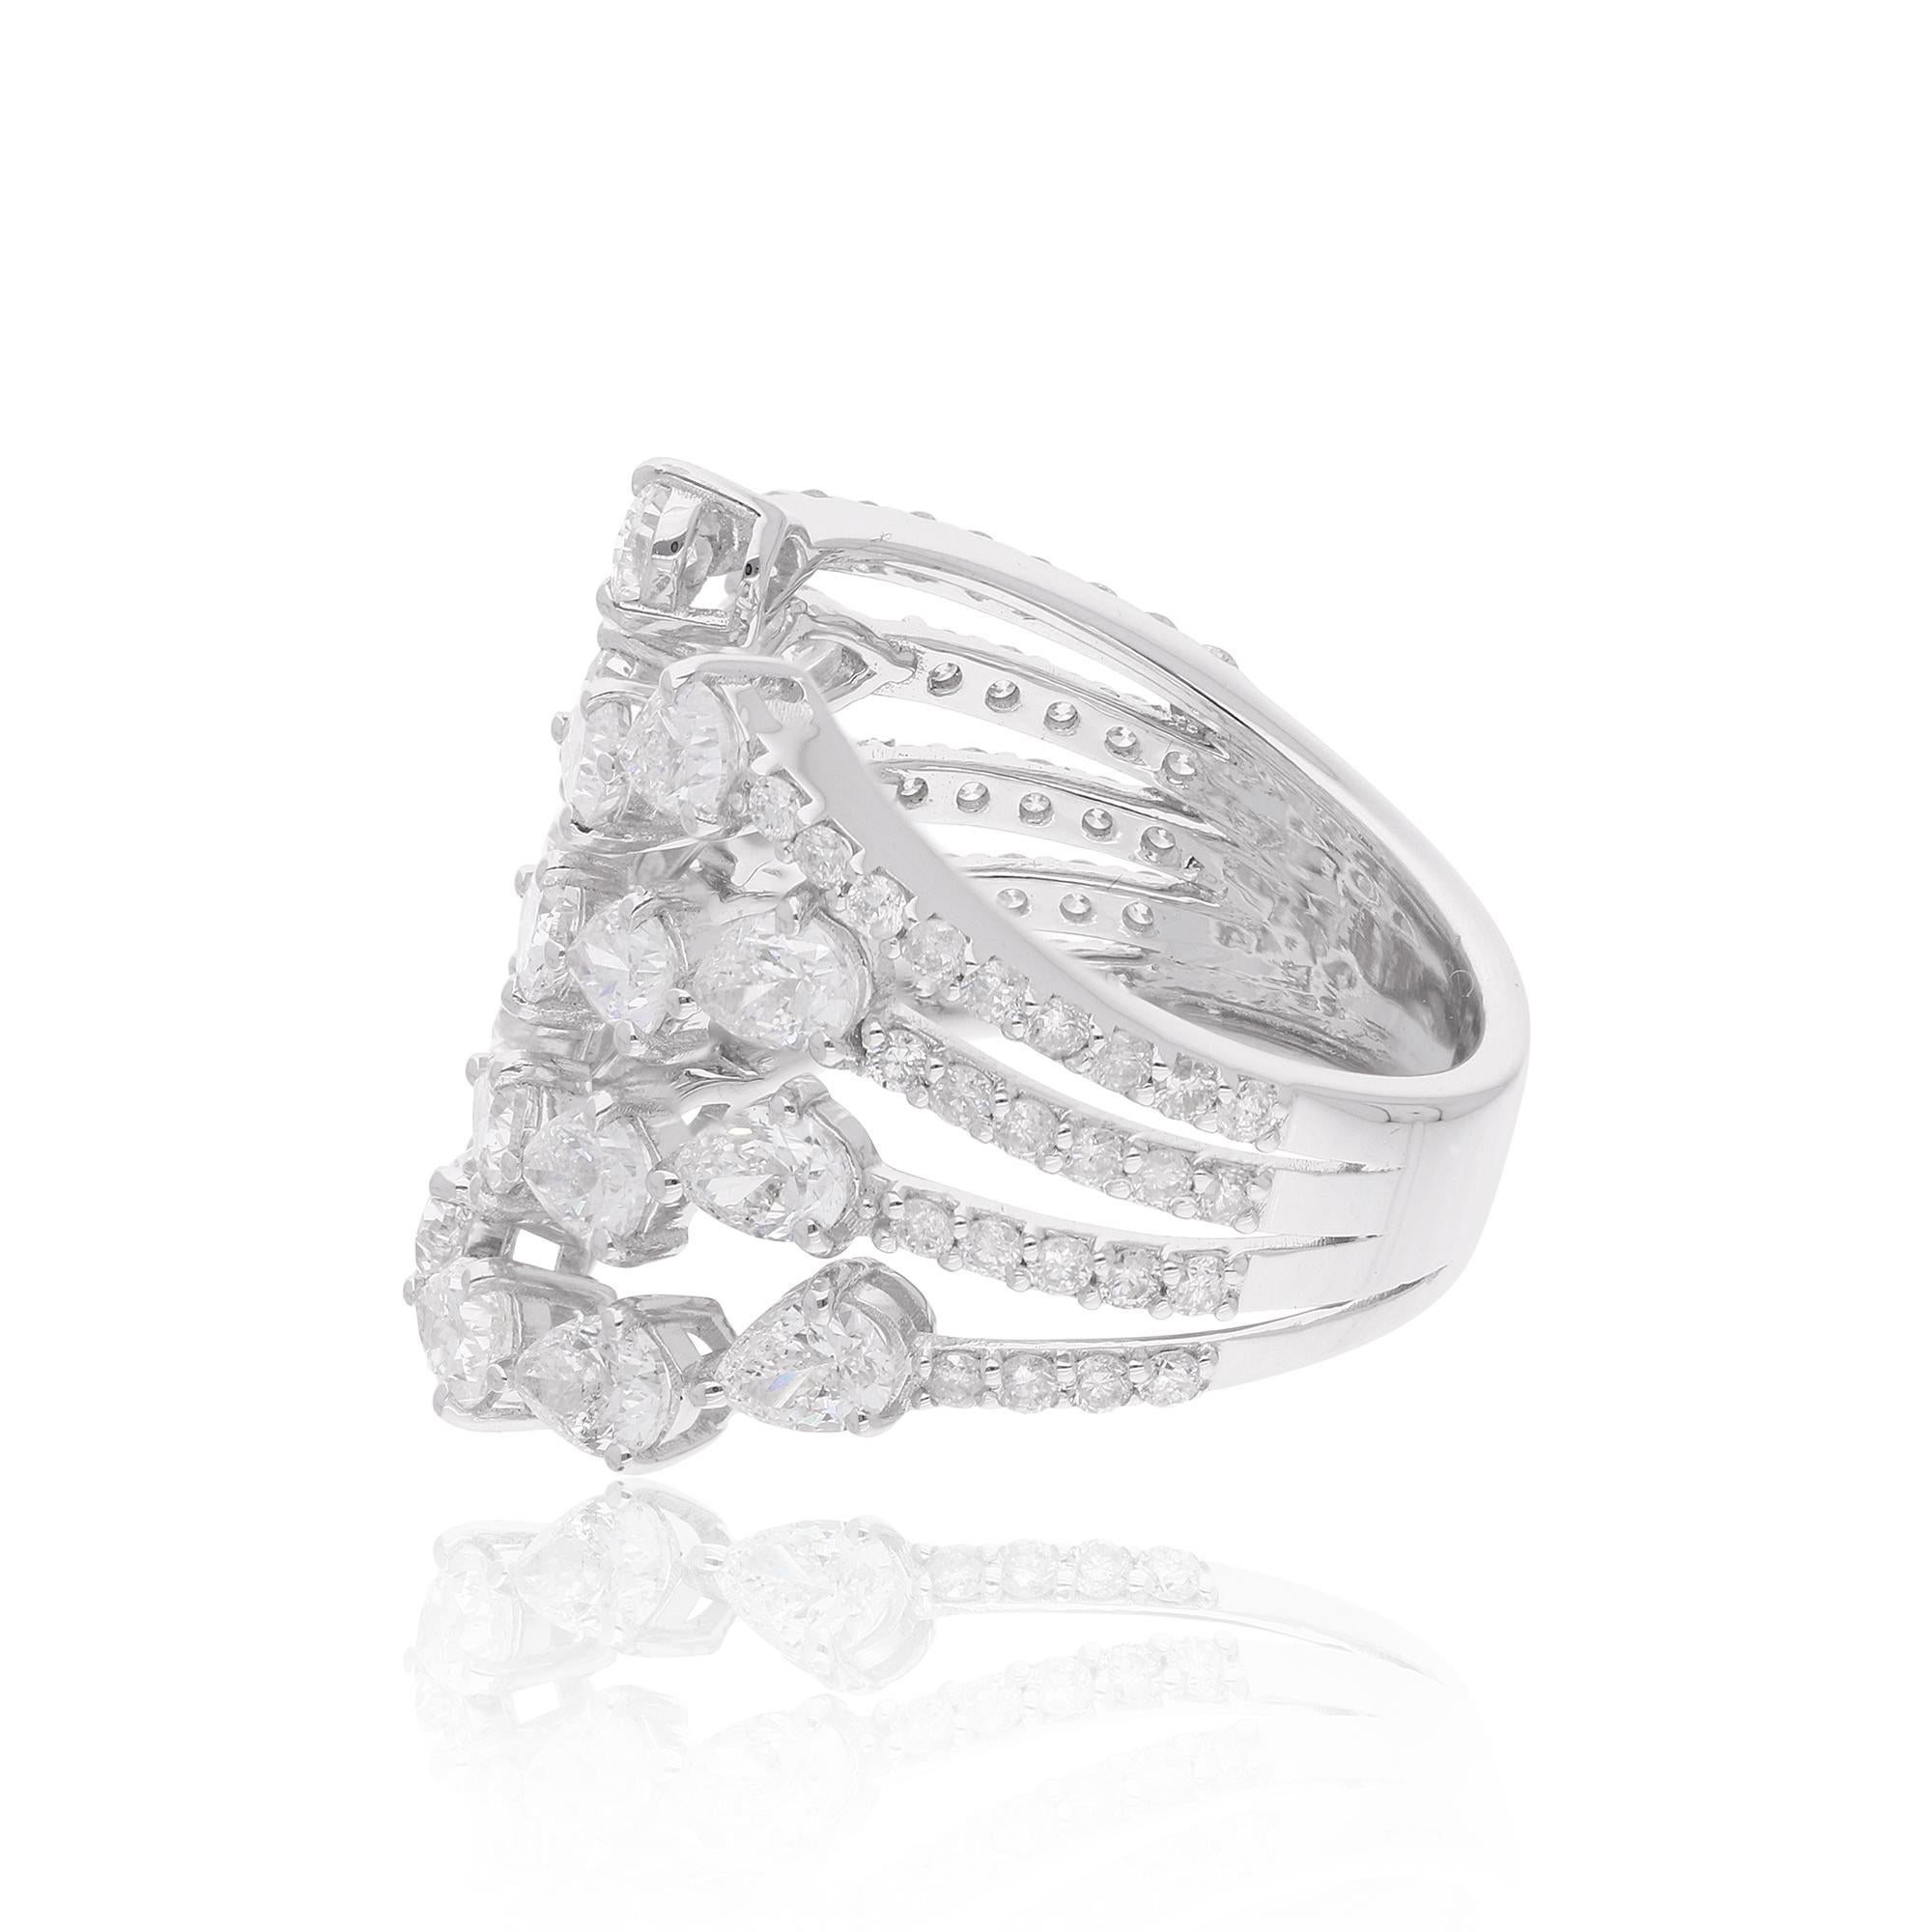 The cocktail ring design is bold and eye-catching, designed to make a statement. The surrounding design elements can vary and may include accent diamonds, intricate metalwork, or other gemstones to enhance the overall aesthetic appeal.

Item Code :-